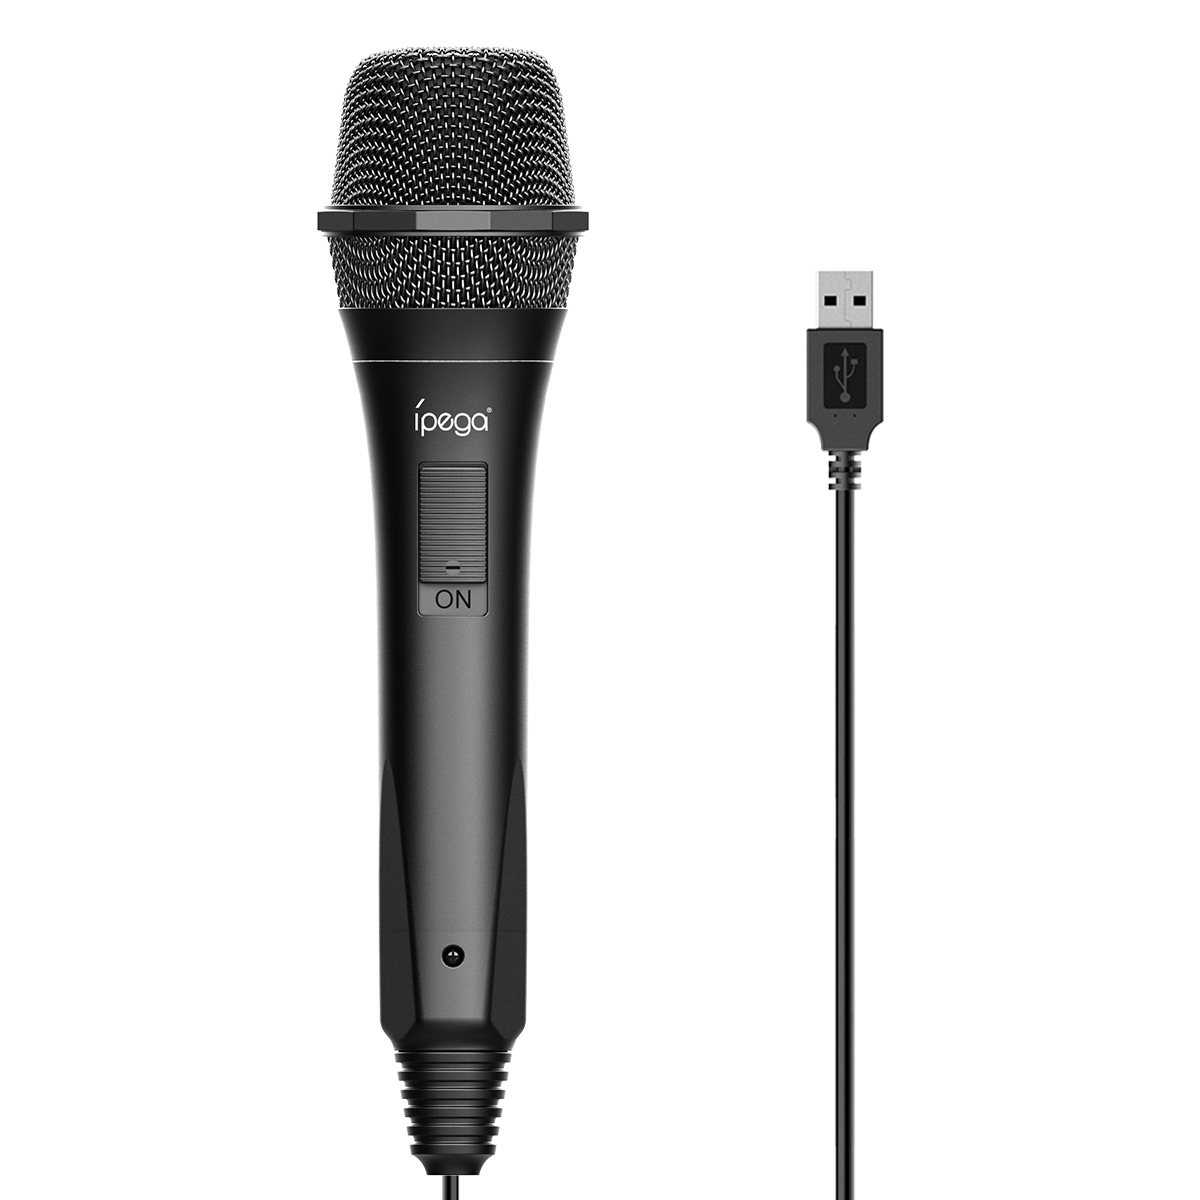 PG-9209 professional E-sports microphone